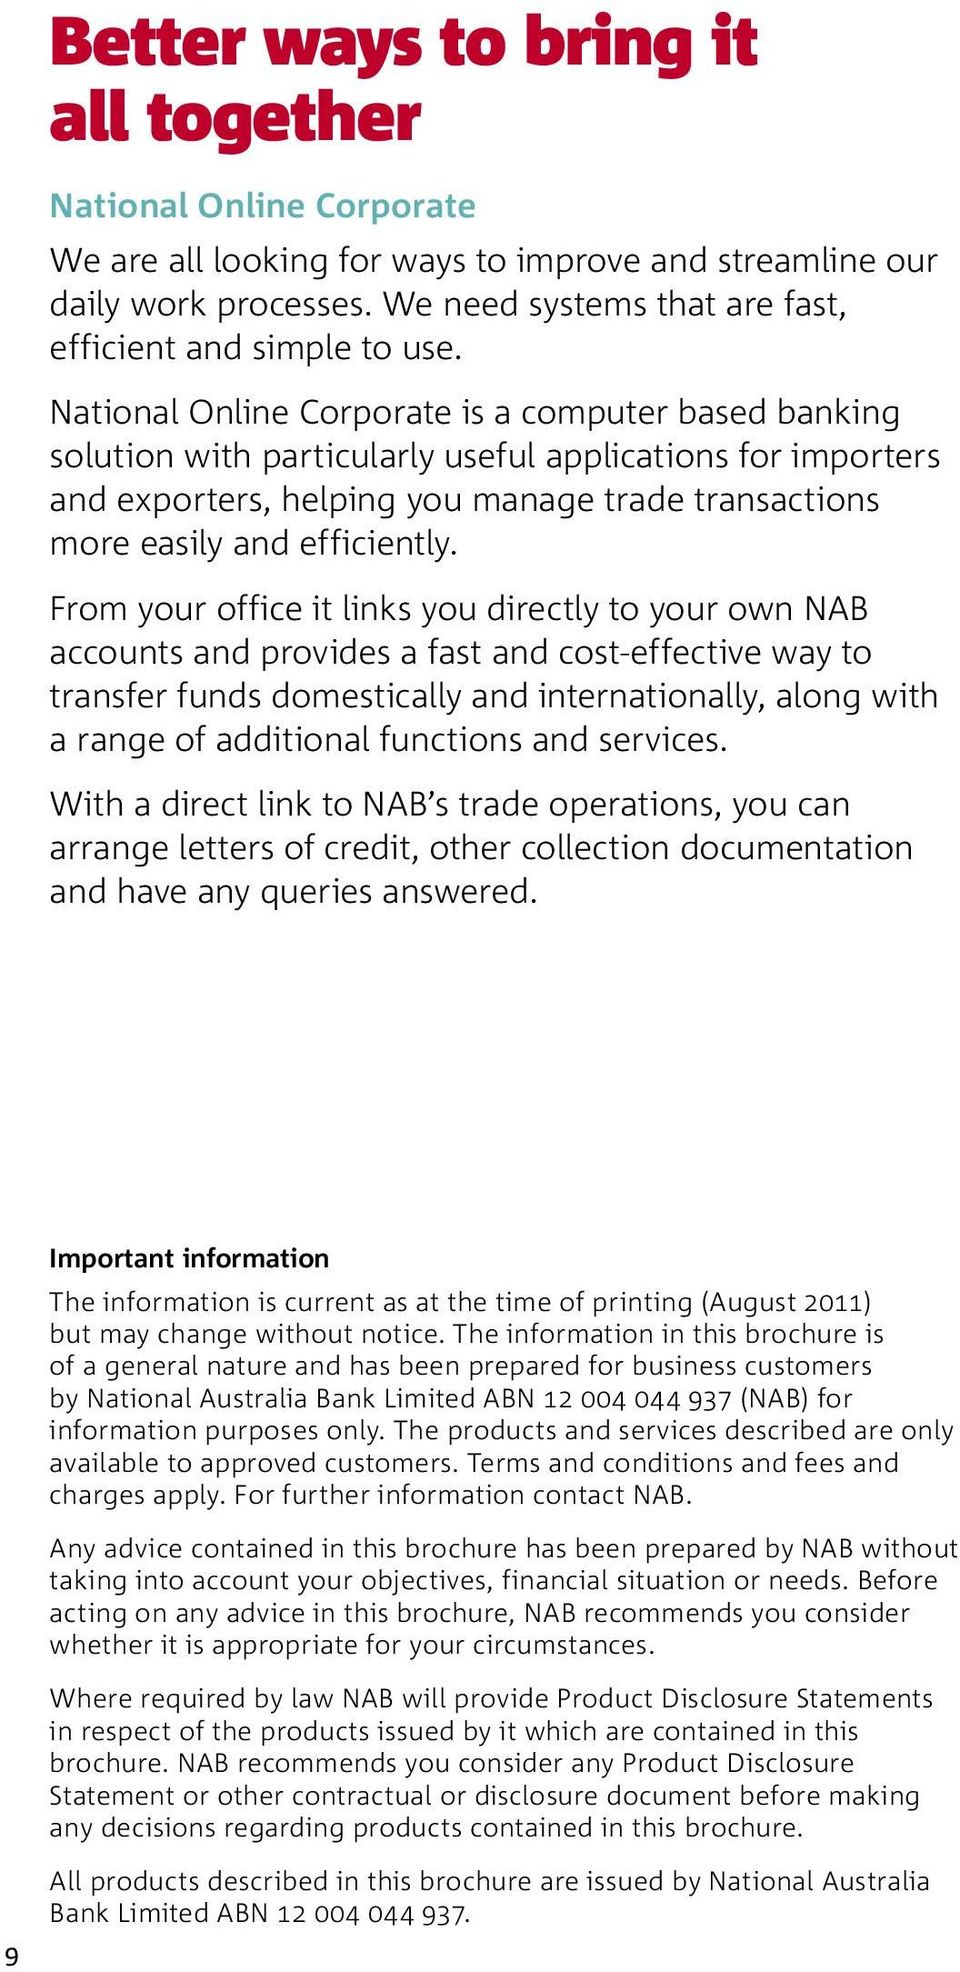 National Online Corporate is a computer based banking solution with particularly useful applications for importers and exporters, helping you manage trade transactions more easily and efficiently.